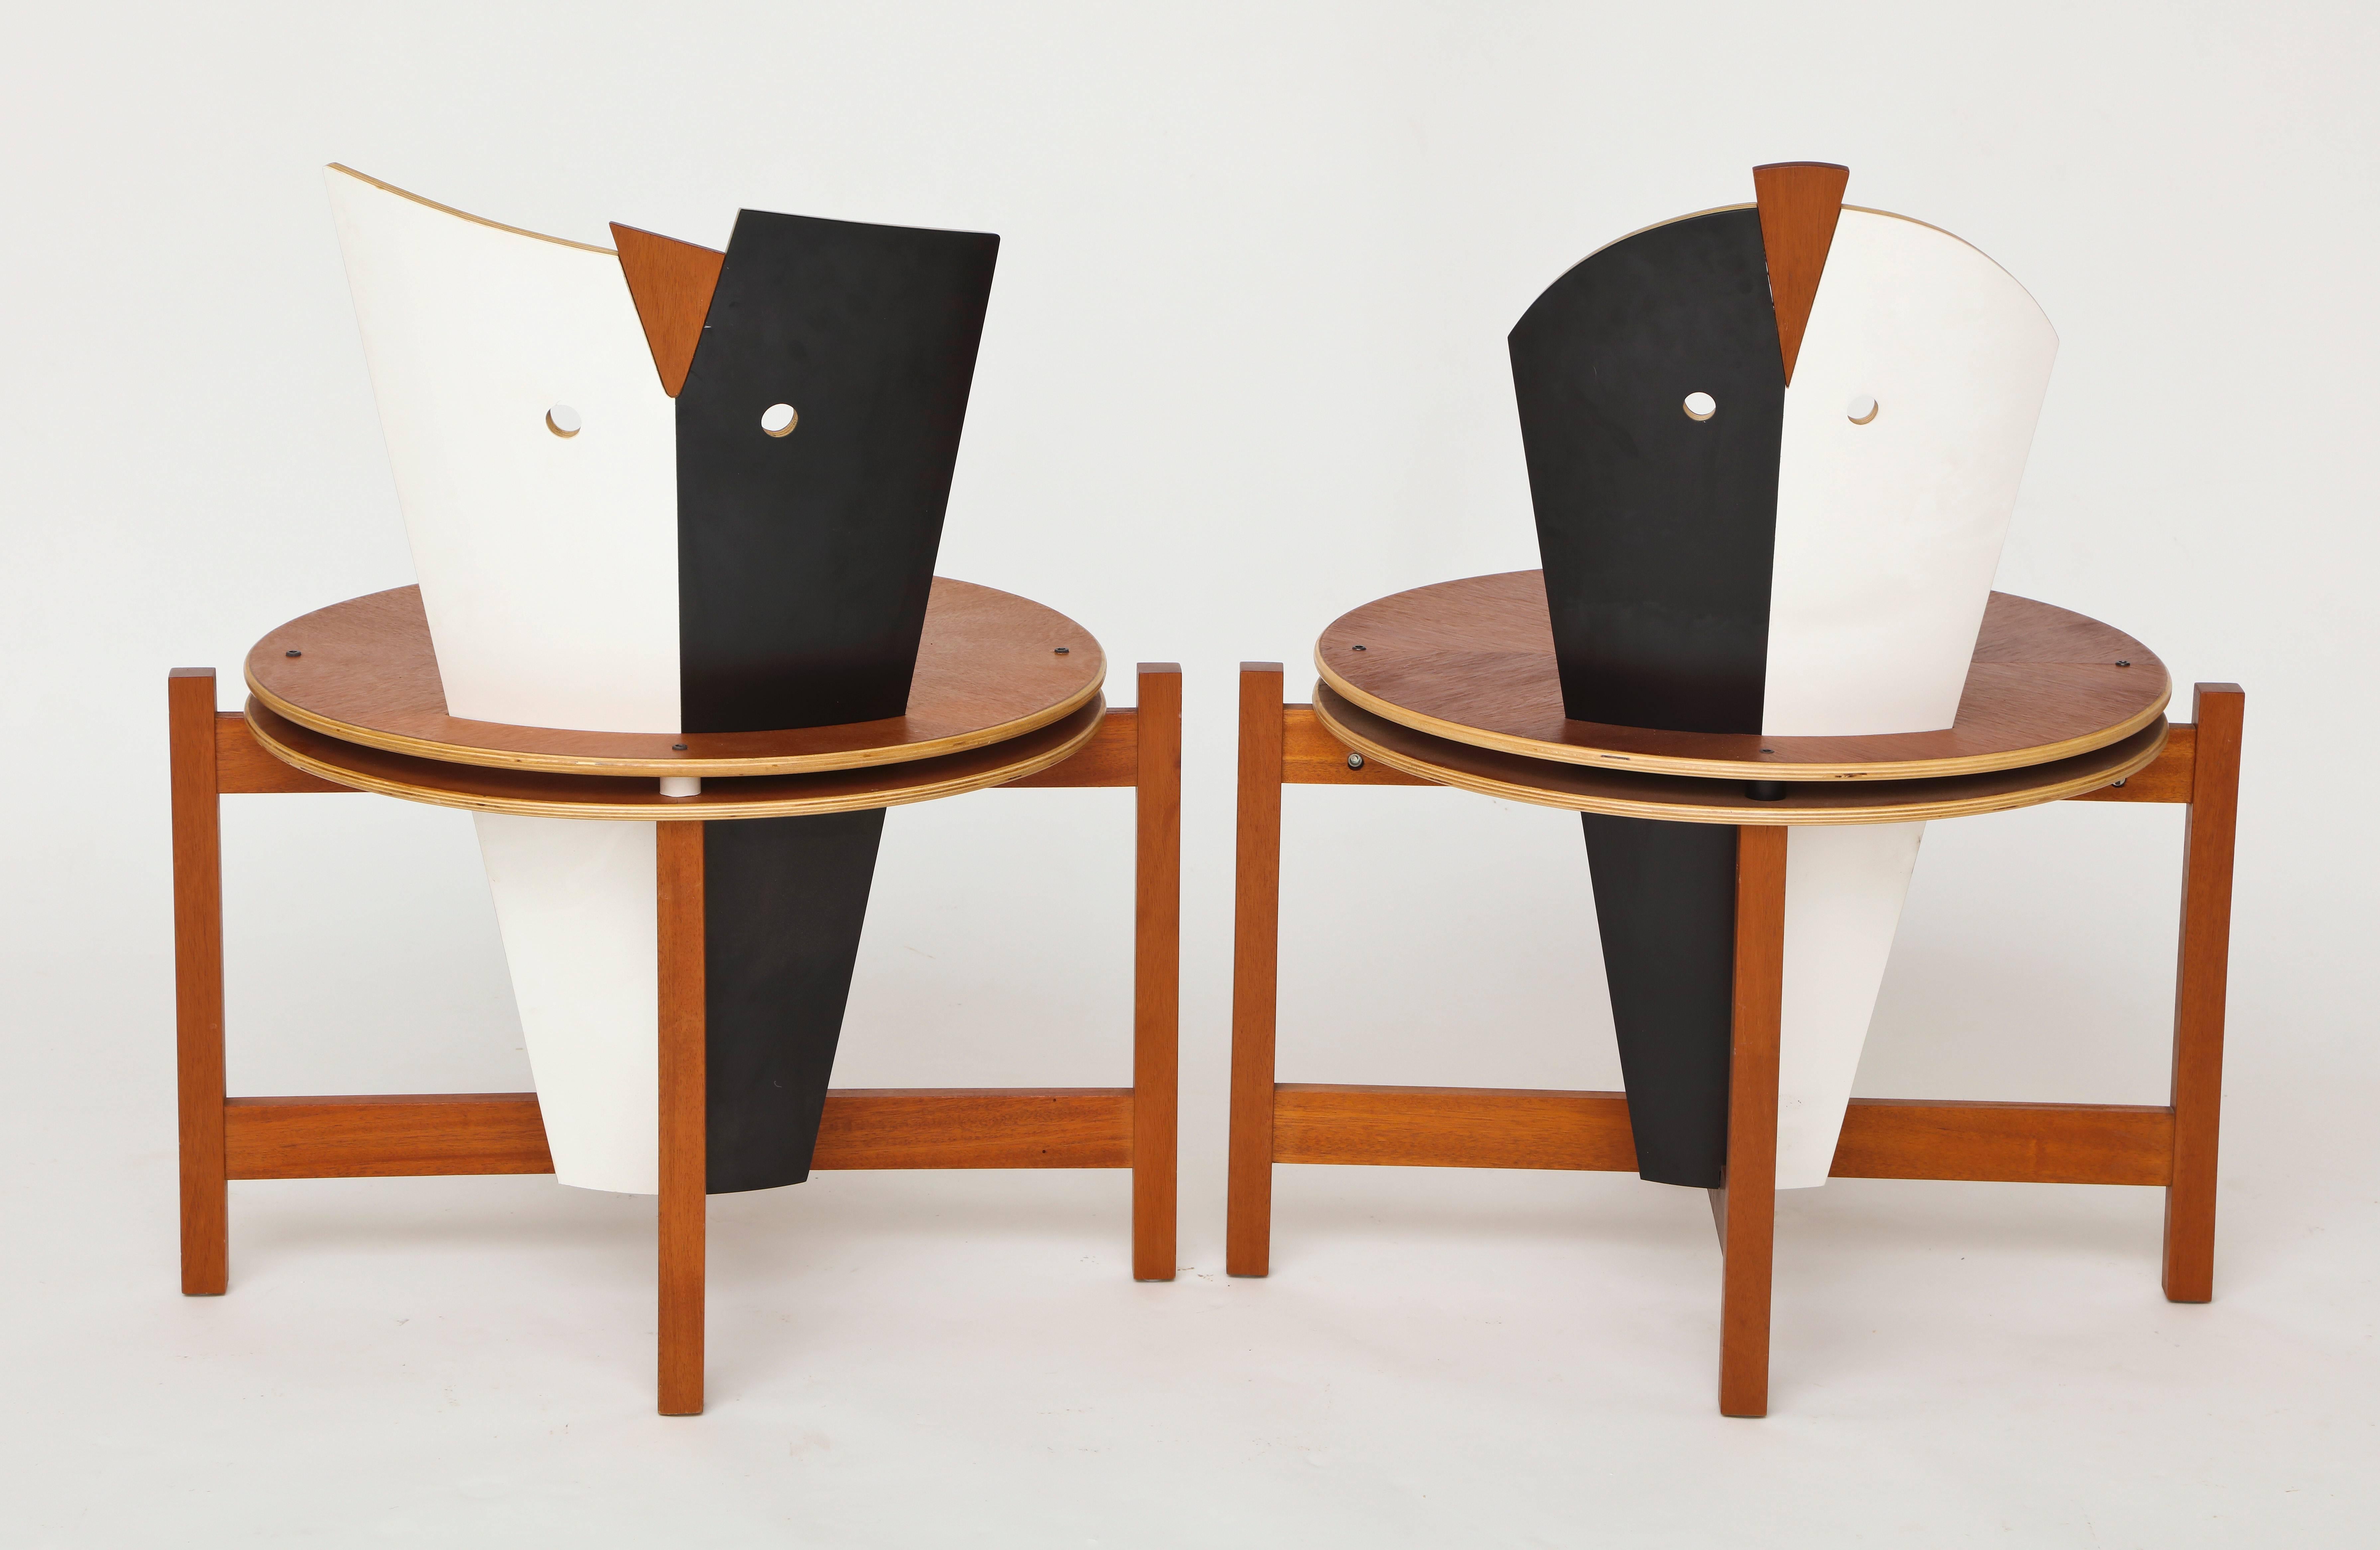 Robert Evanson Post Modern 1980 Chairs Tables Pair Modernist Memphis

Modernist pair of chairs or tables.
Stained and painted wood chairs. Back of chairs form a stylized mask. Circular seats and rectangular back legs are joined with a stretcher